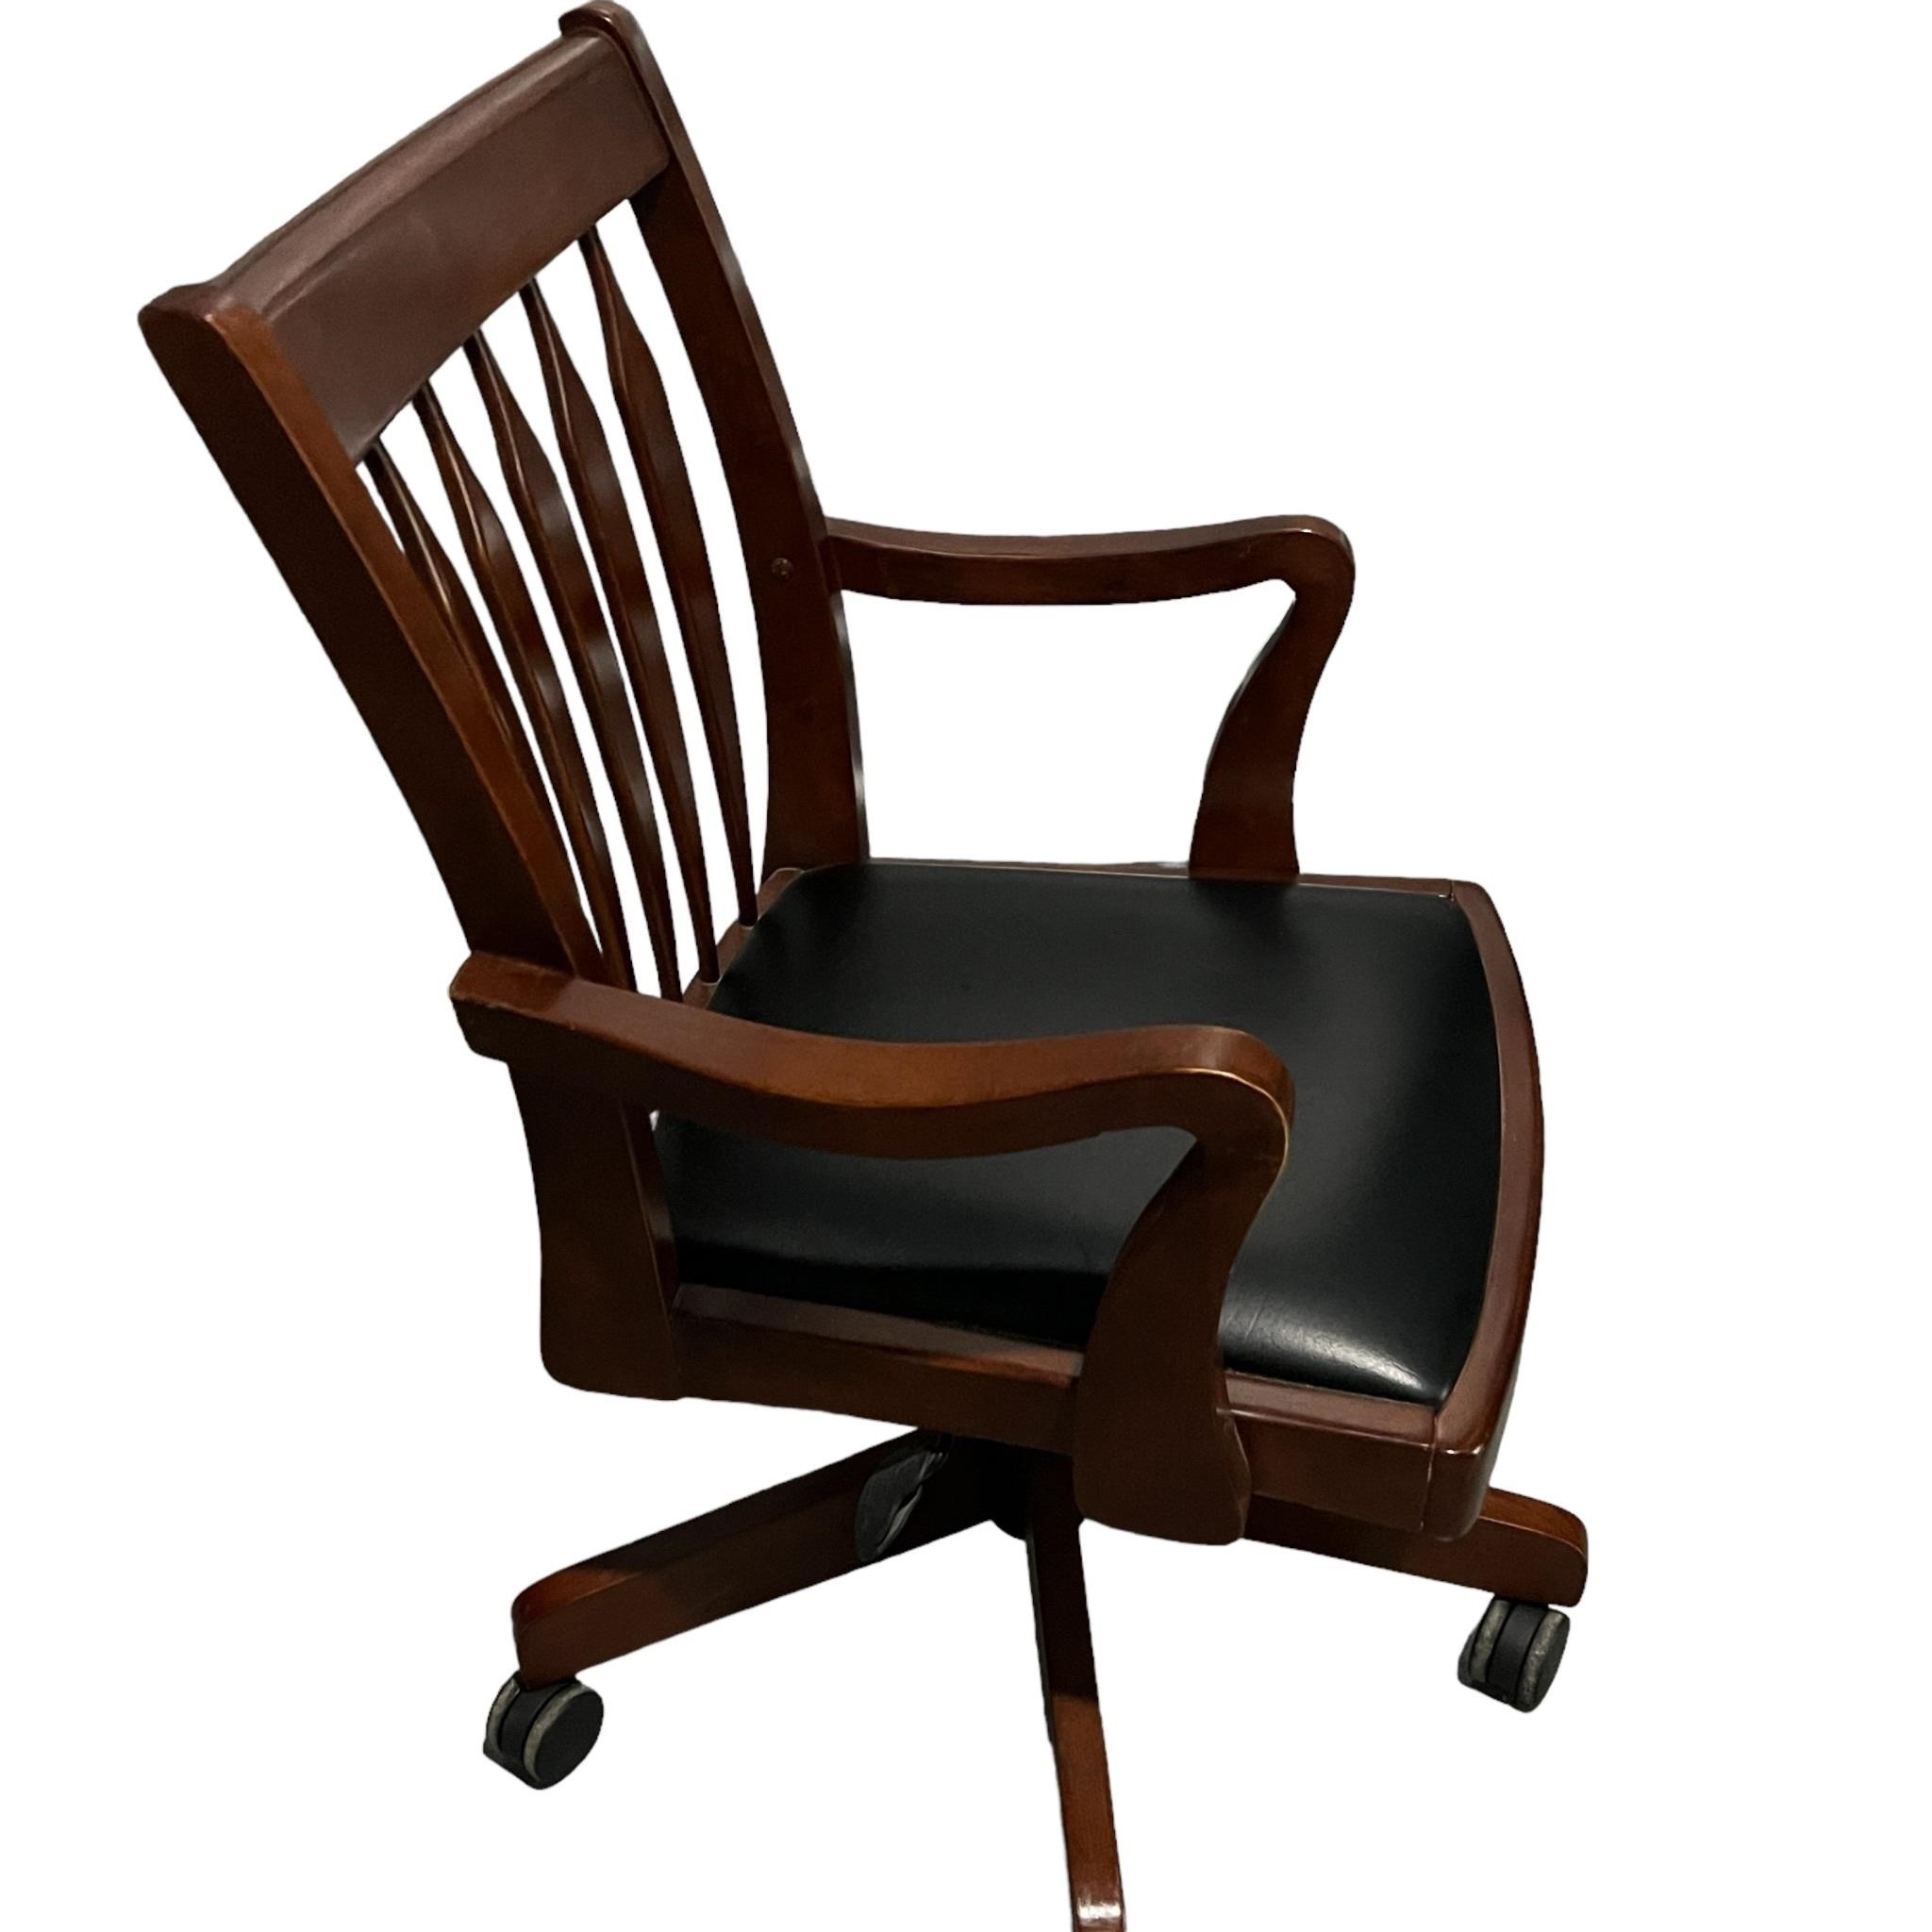 Vintage Desk Chair - Wood and Leather